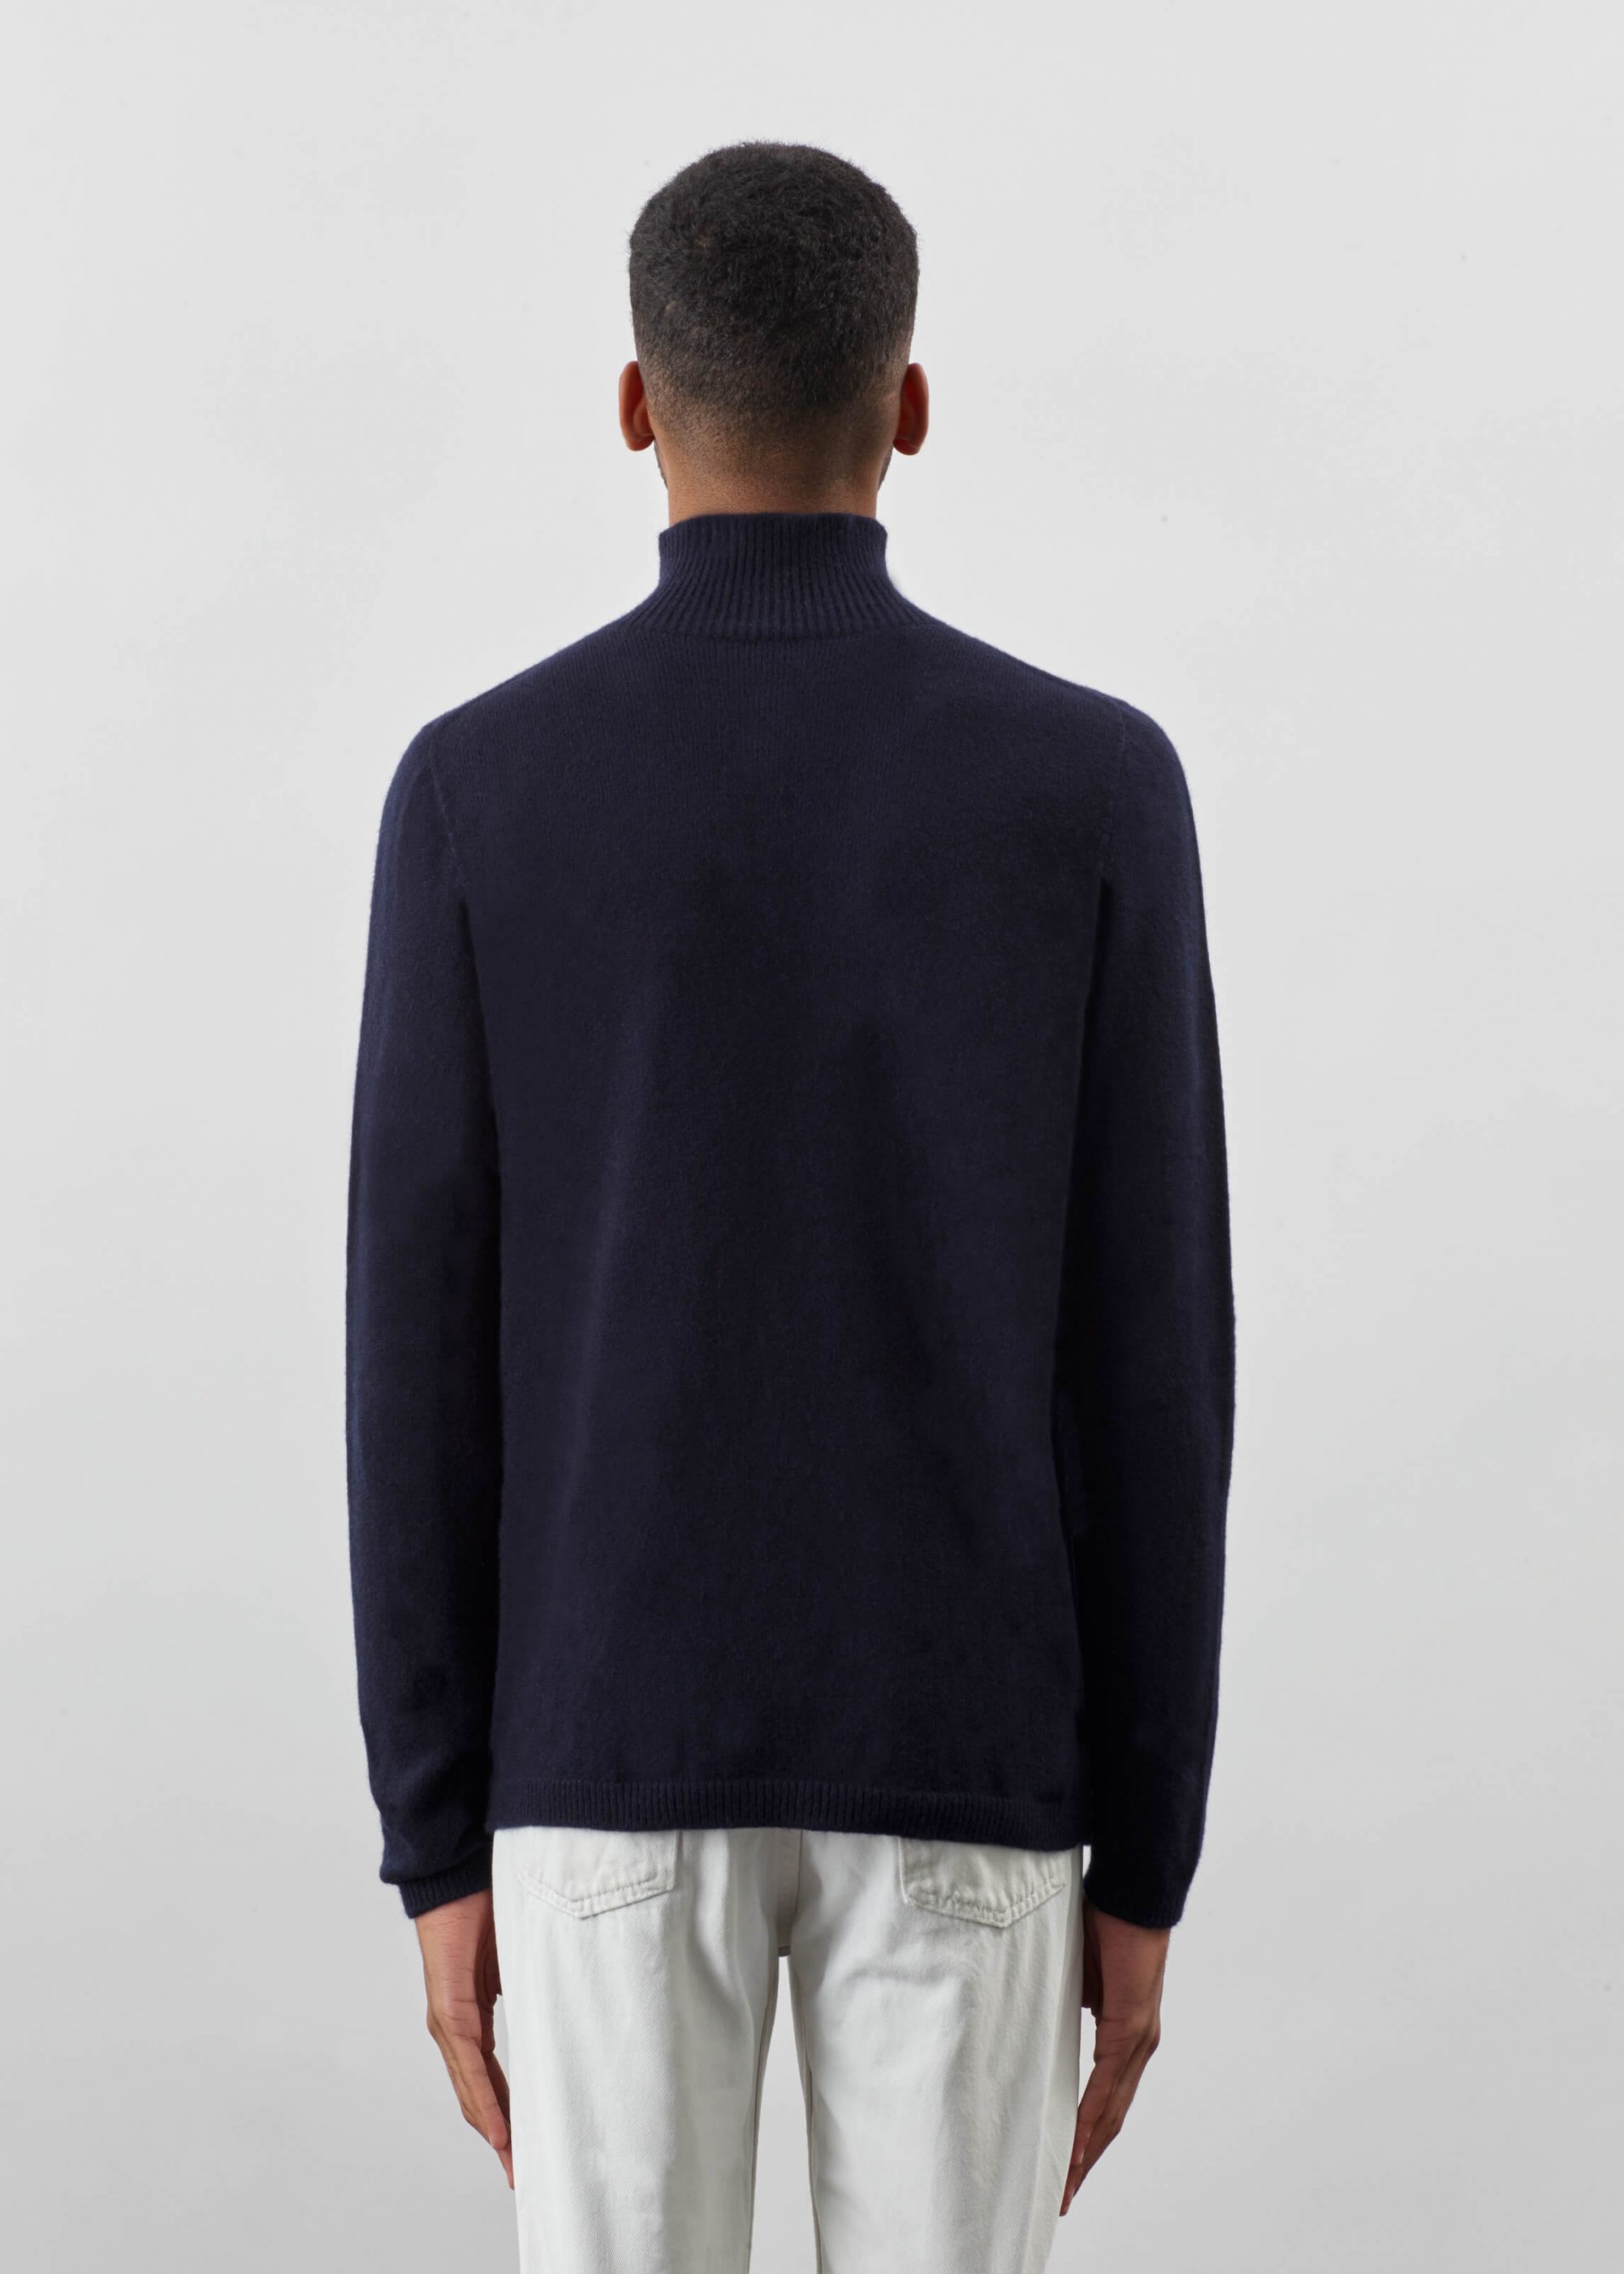 Product image for »Jobs« Navy Polo-Neck Sweater Felted Cashmere Merino